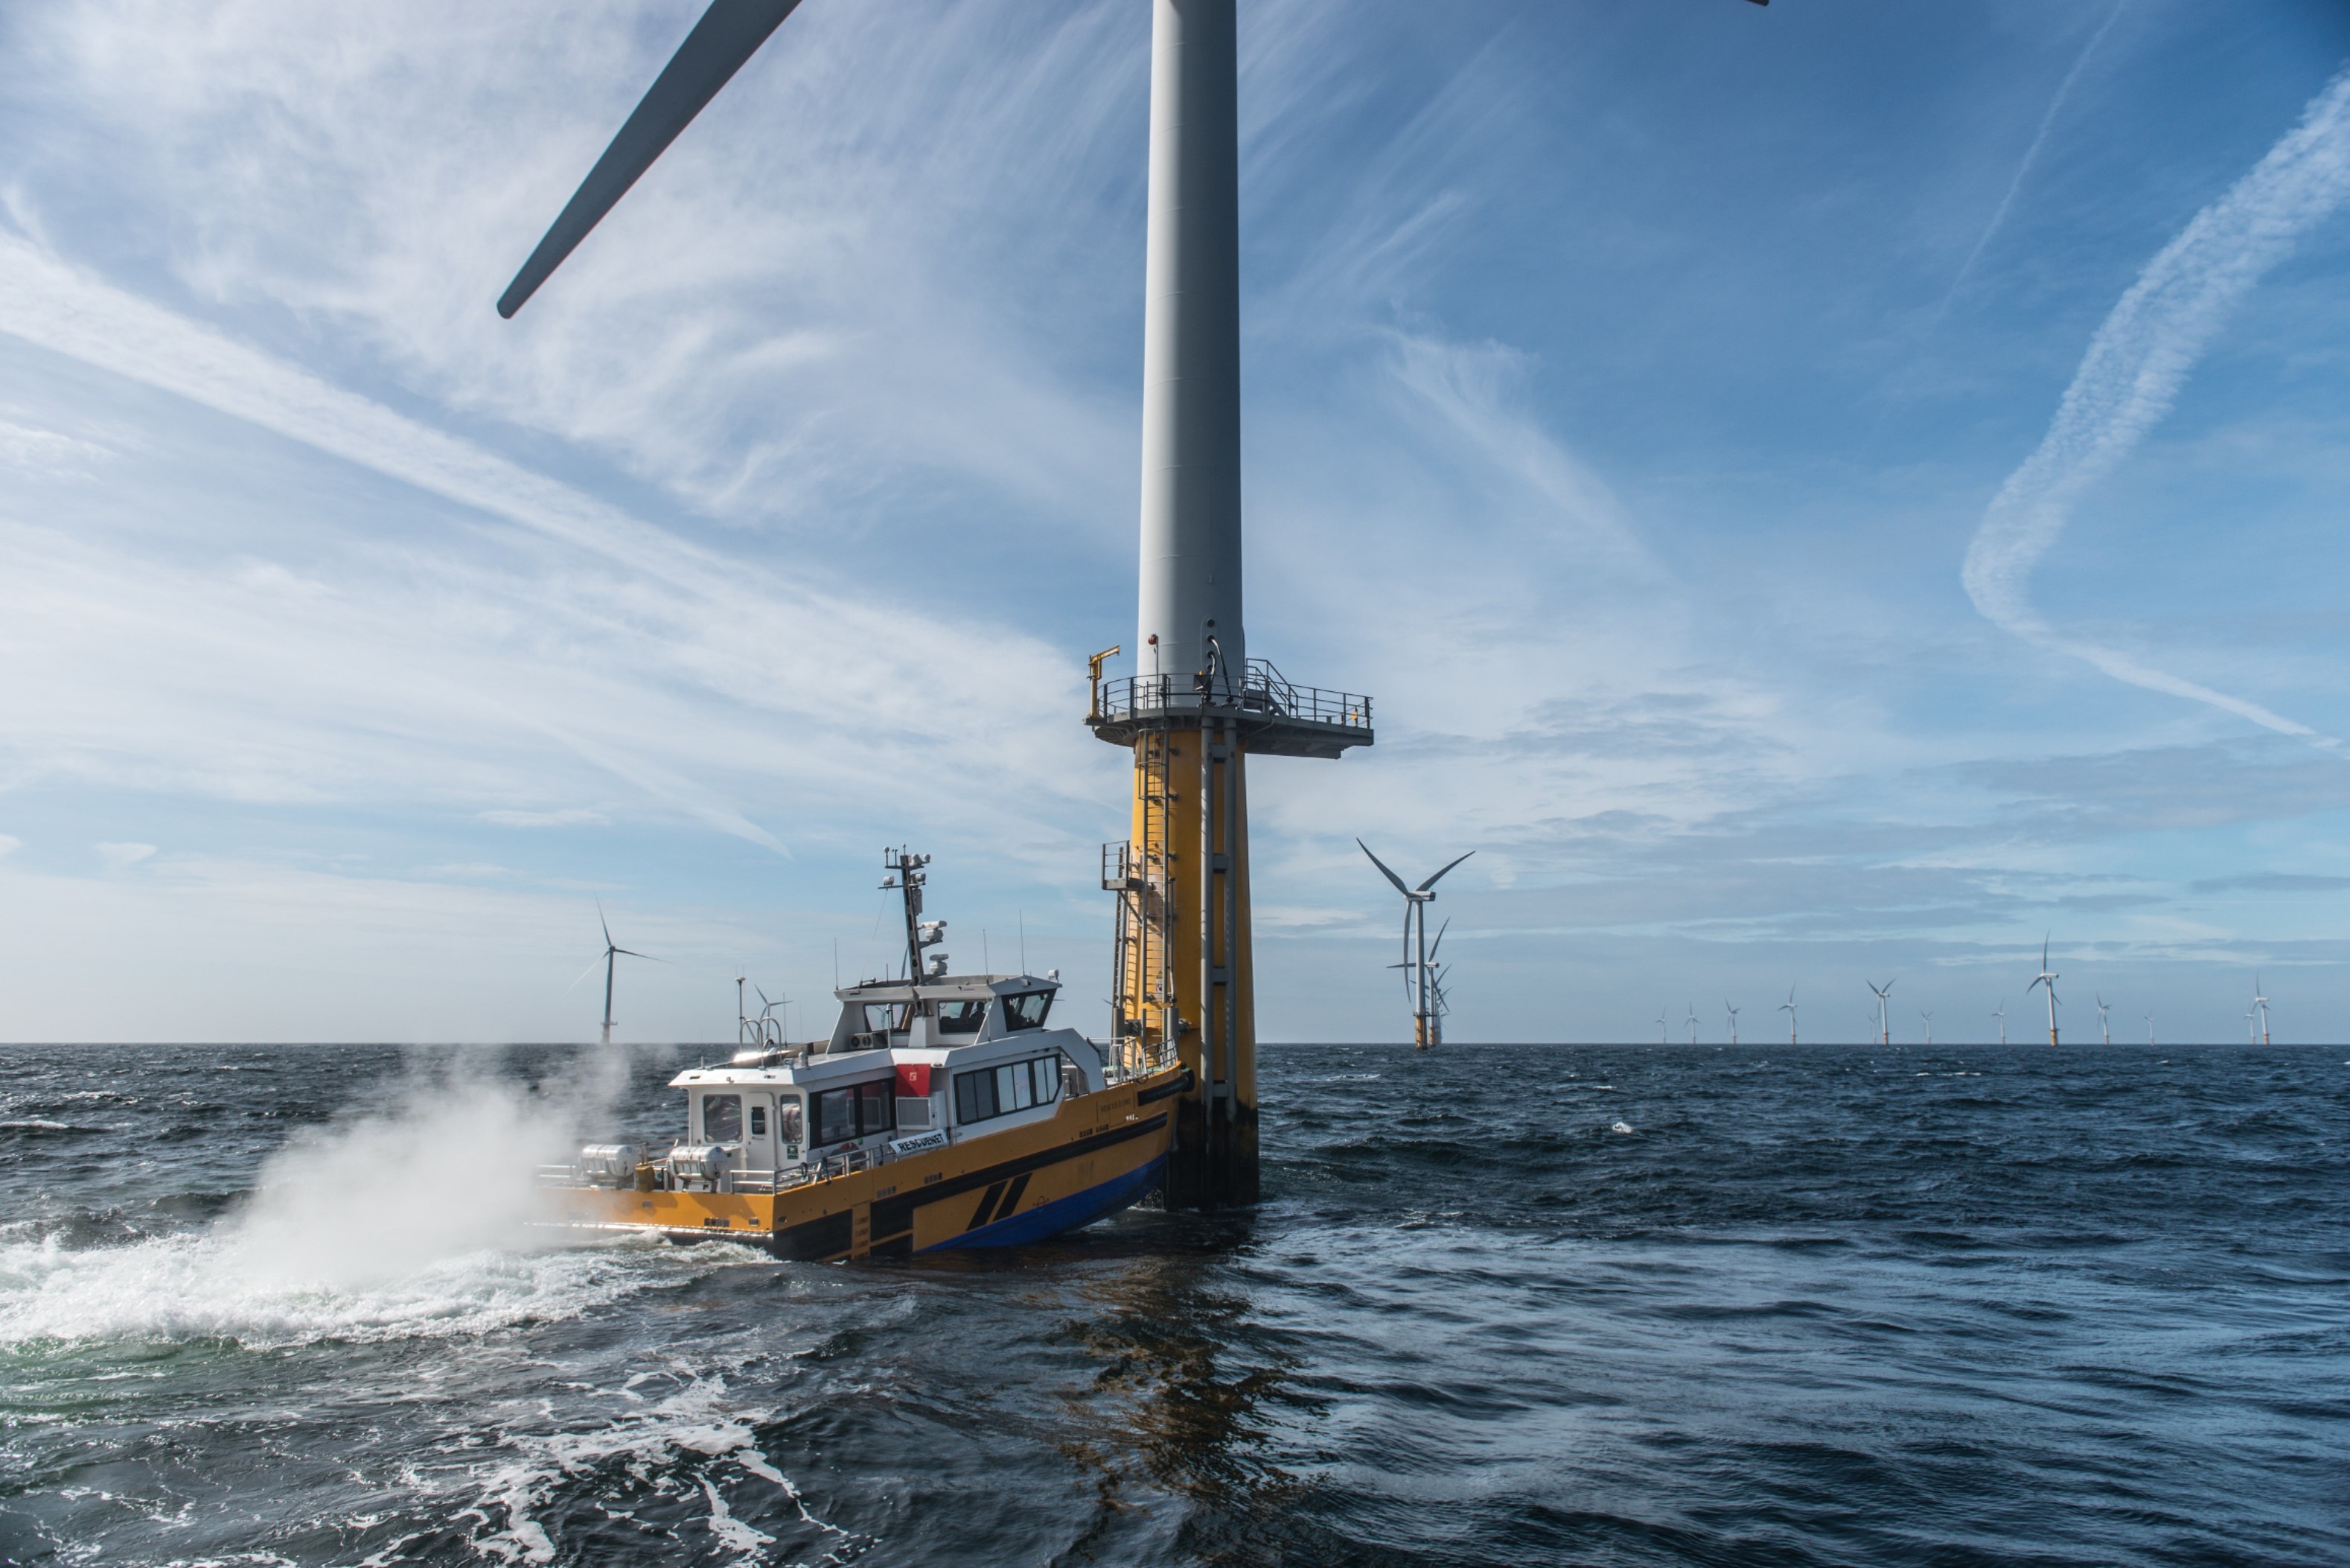 A crew transfer vessel at an offshore wind turbine